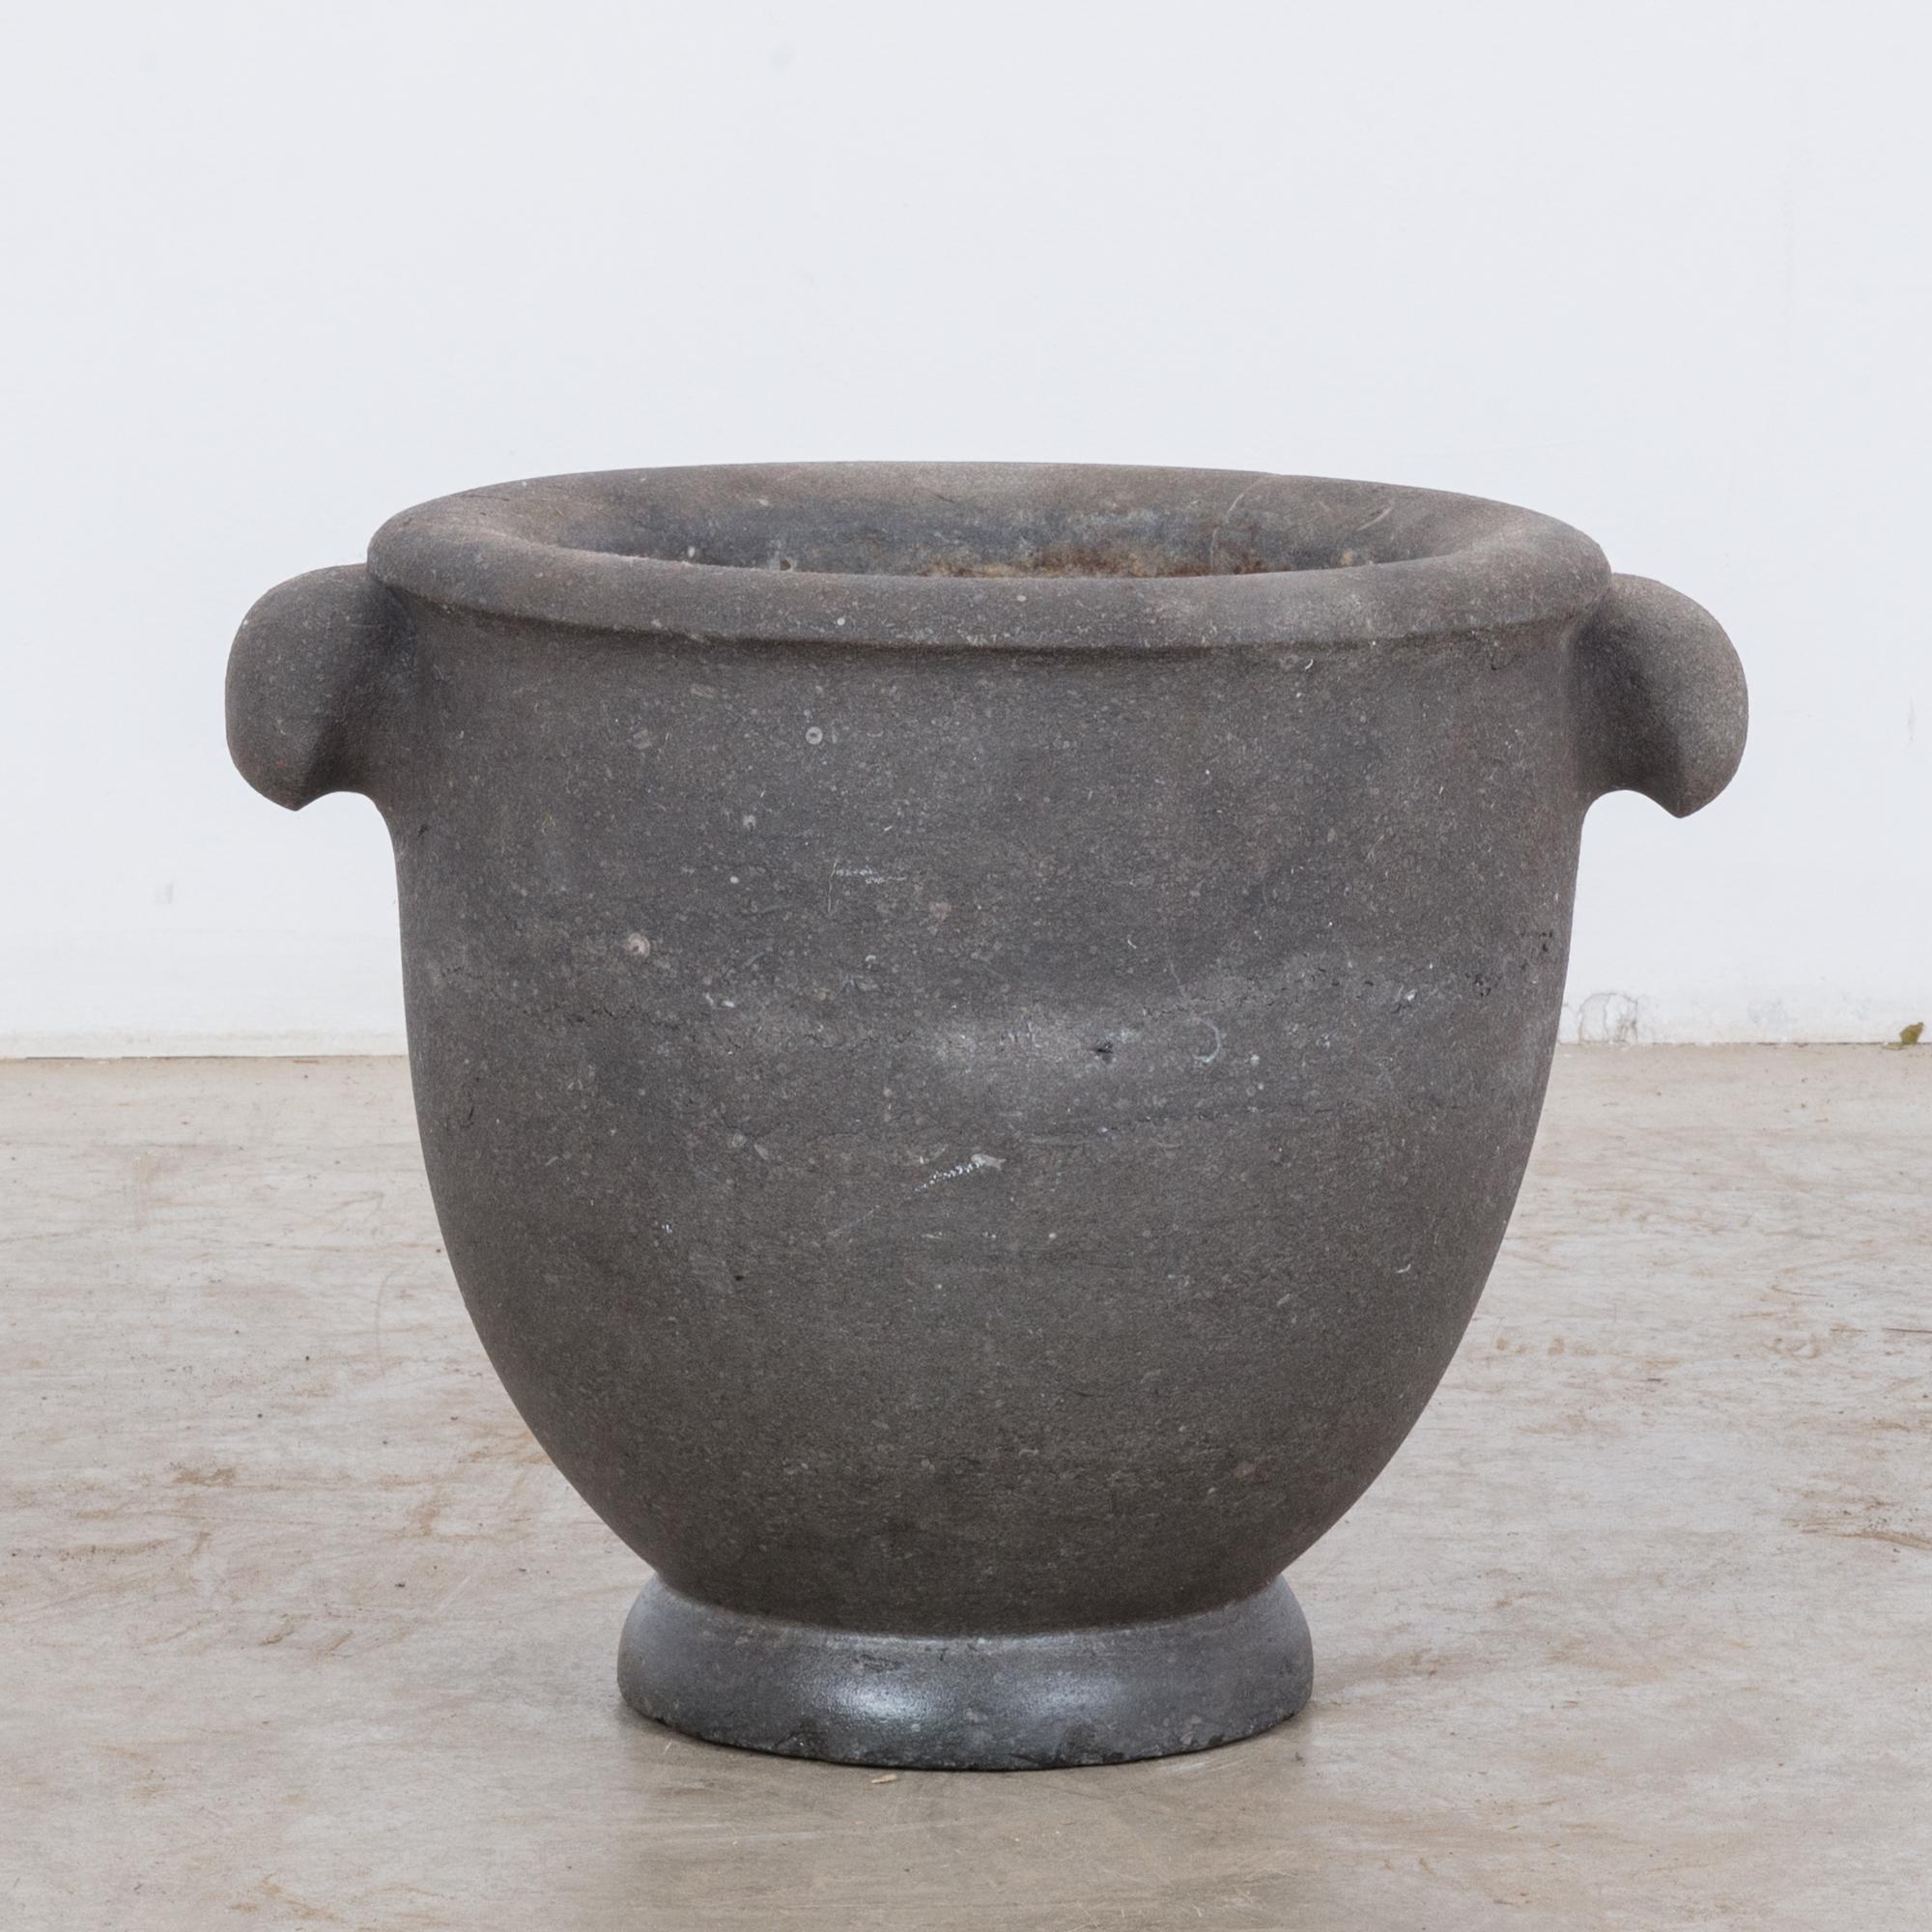 This large, black stone mortar was made in Belgium, circa 1800. It features a rolled rim and handles on the sides. A round foot gives the mortar a slight elevation. With its beautifully weathered patina, it will be a unique decorative piece for your